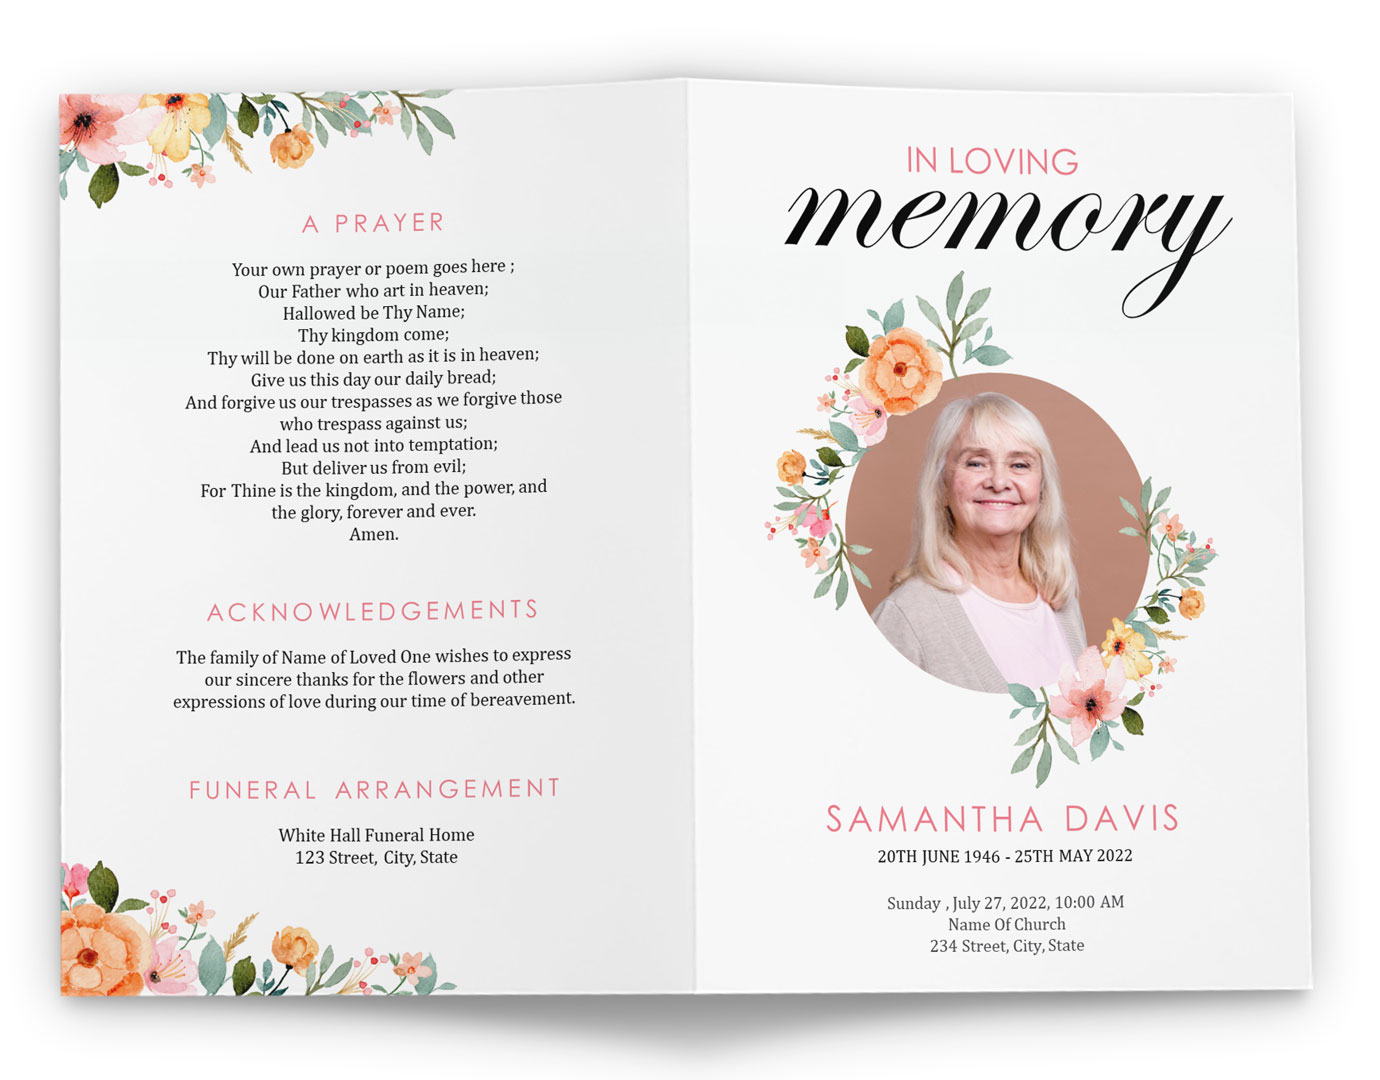 Download Funeral Pamphlet Template For A Beautiful DIY Funeral With Regard To Funeral Flyer Template